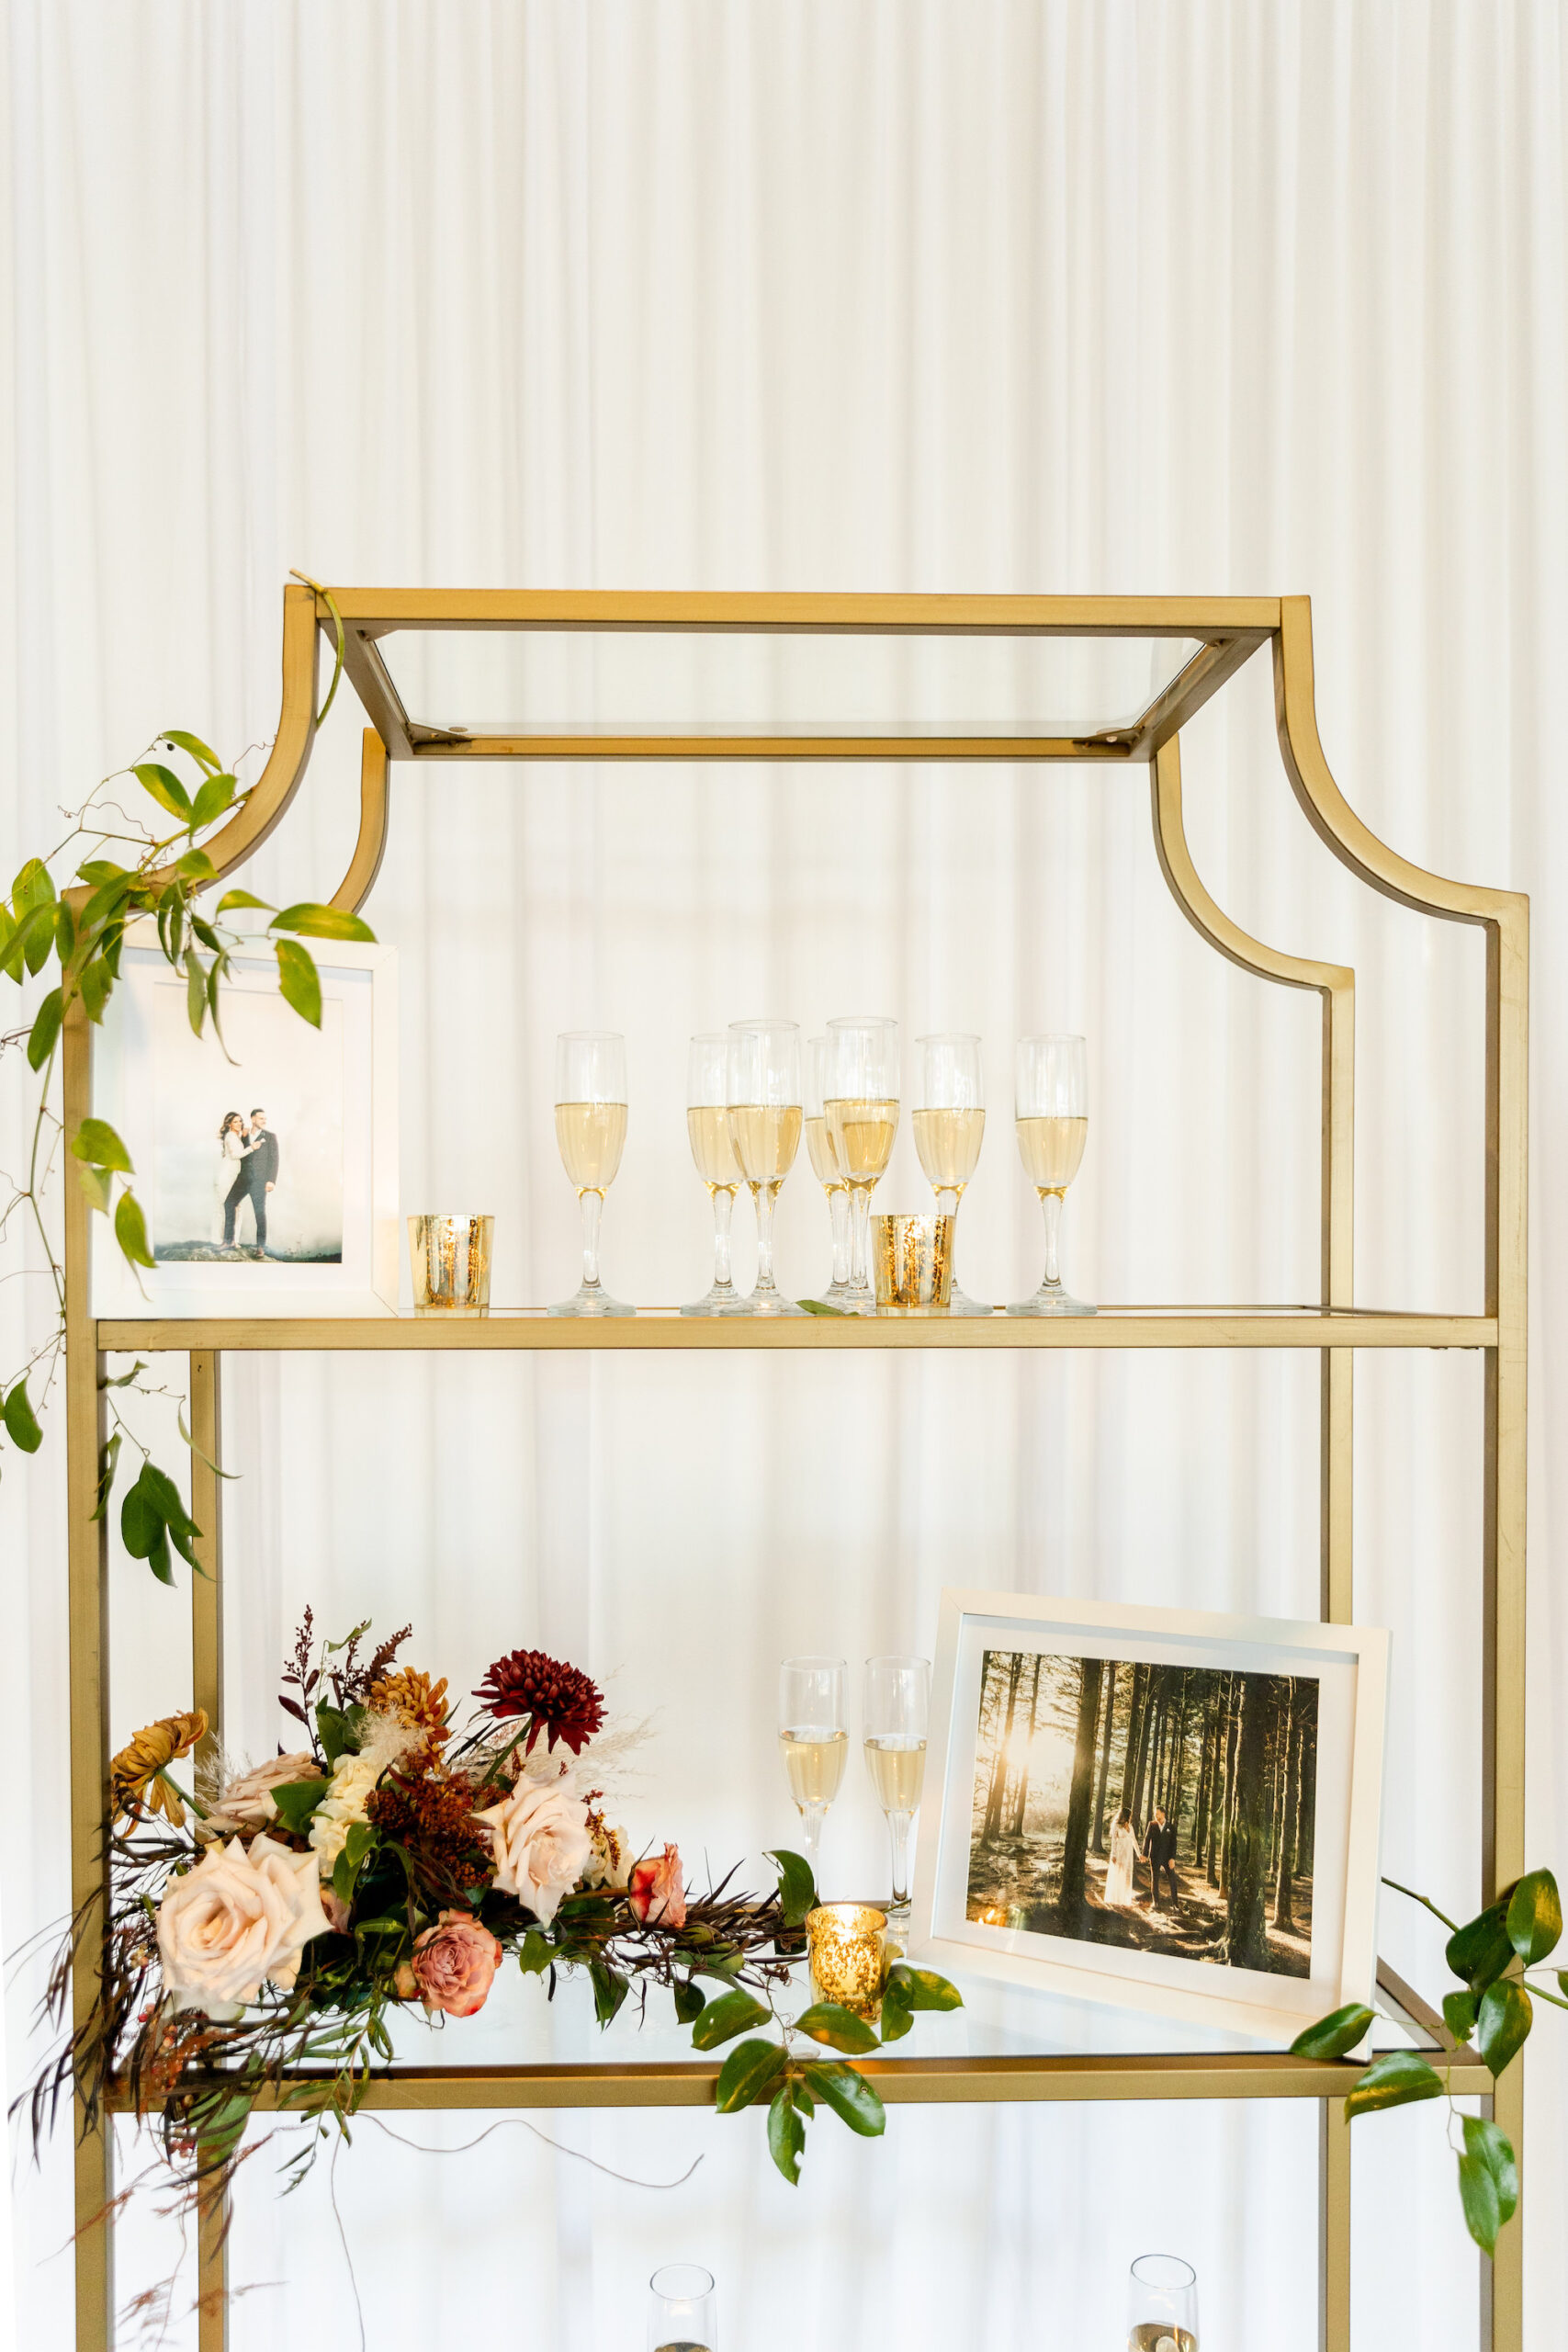 Fall Boho Wedding Ceremony Decor, Tall Gold Shelving with Champagne Welcome Glasses and Fall Colored Floral Bouquet | Tampa Bay Wedding Rentals Gabro Event Services